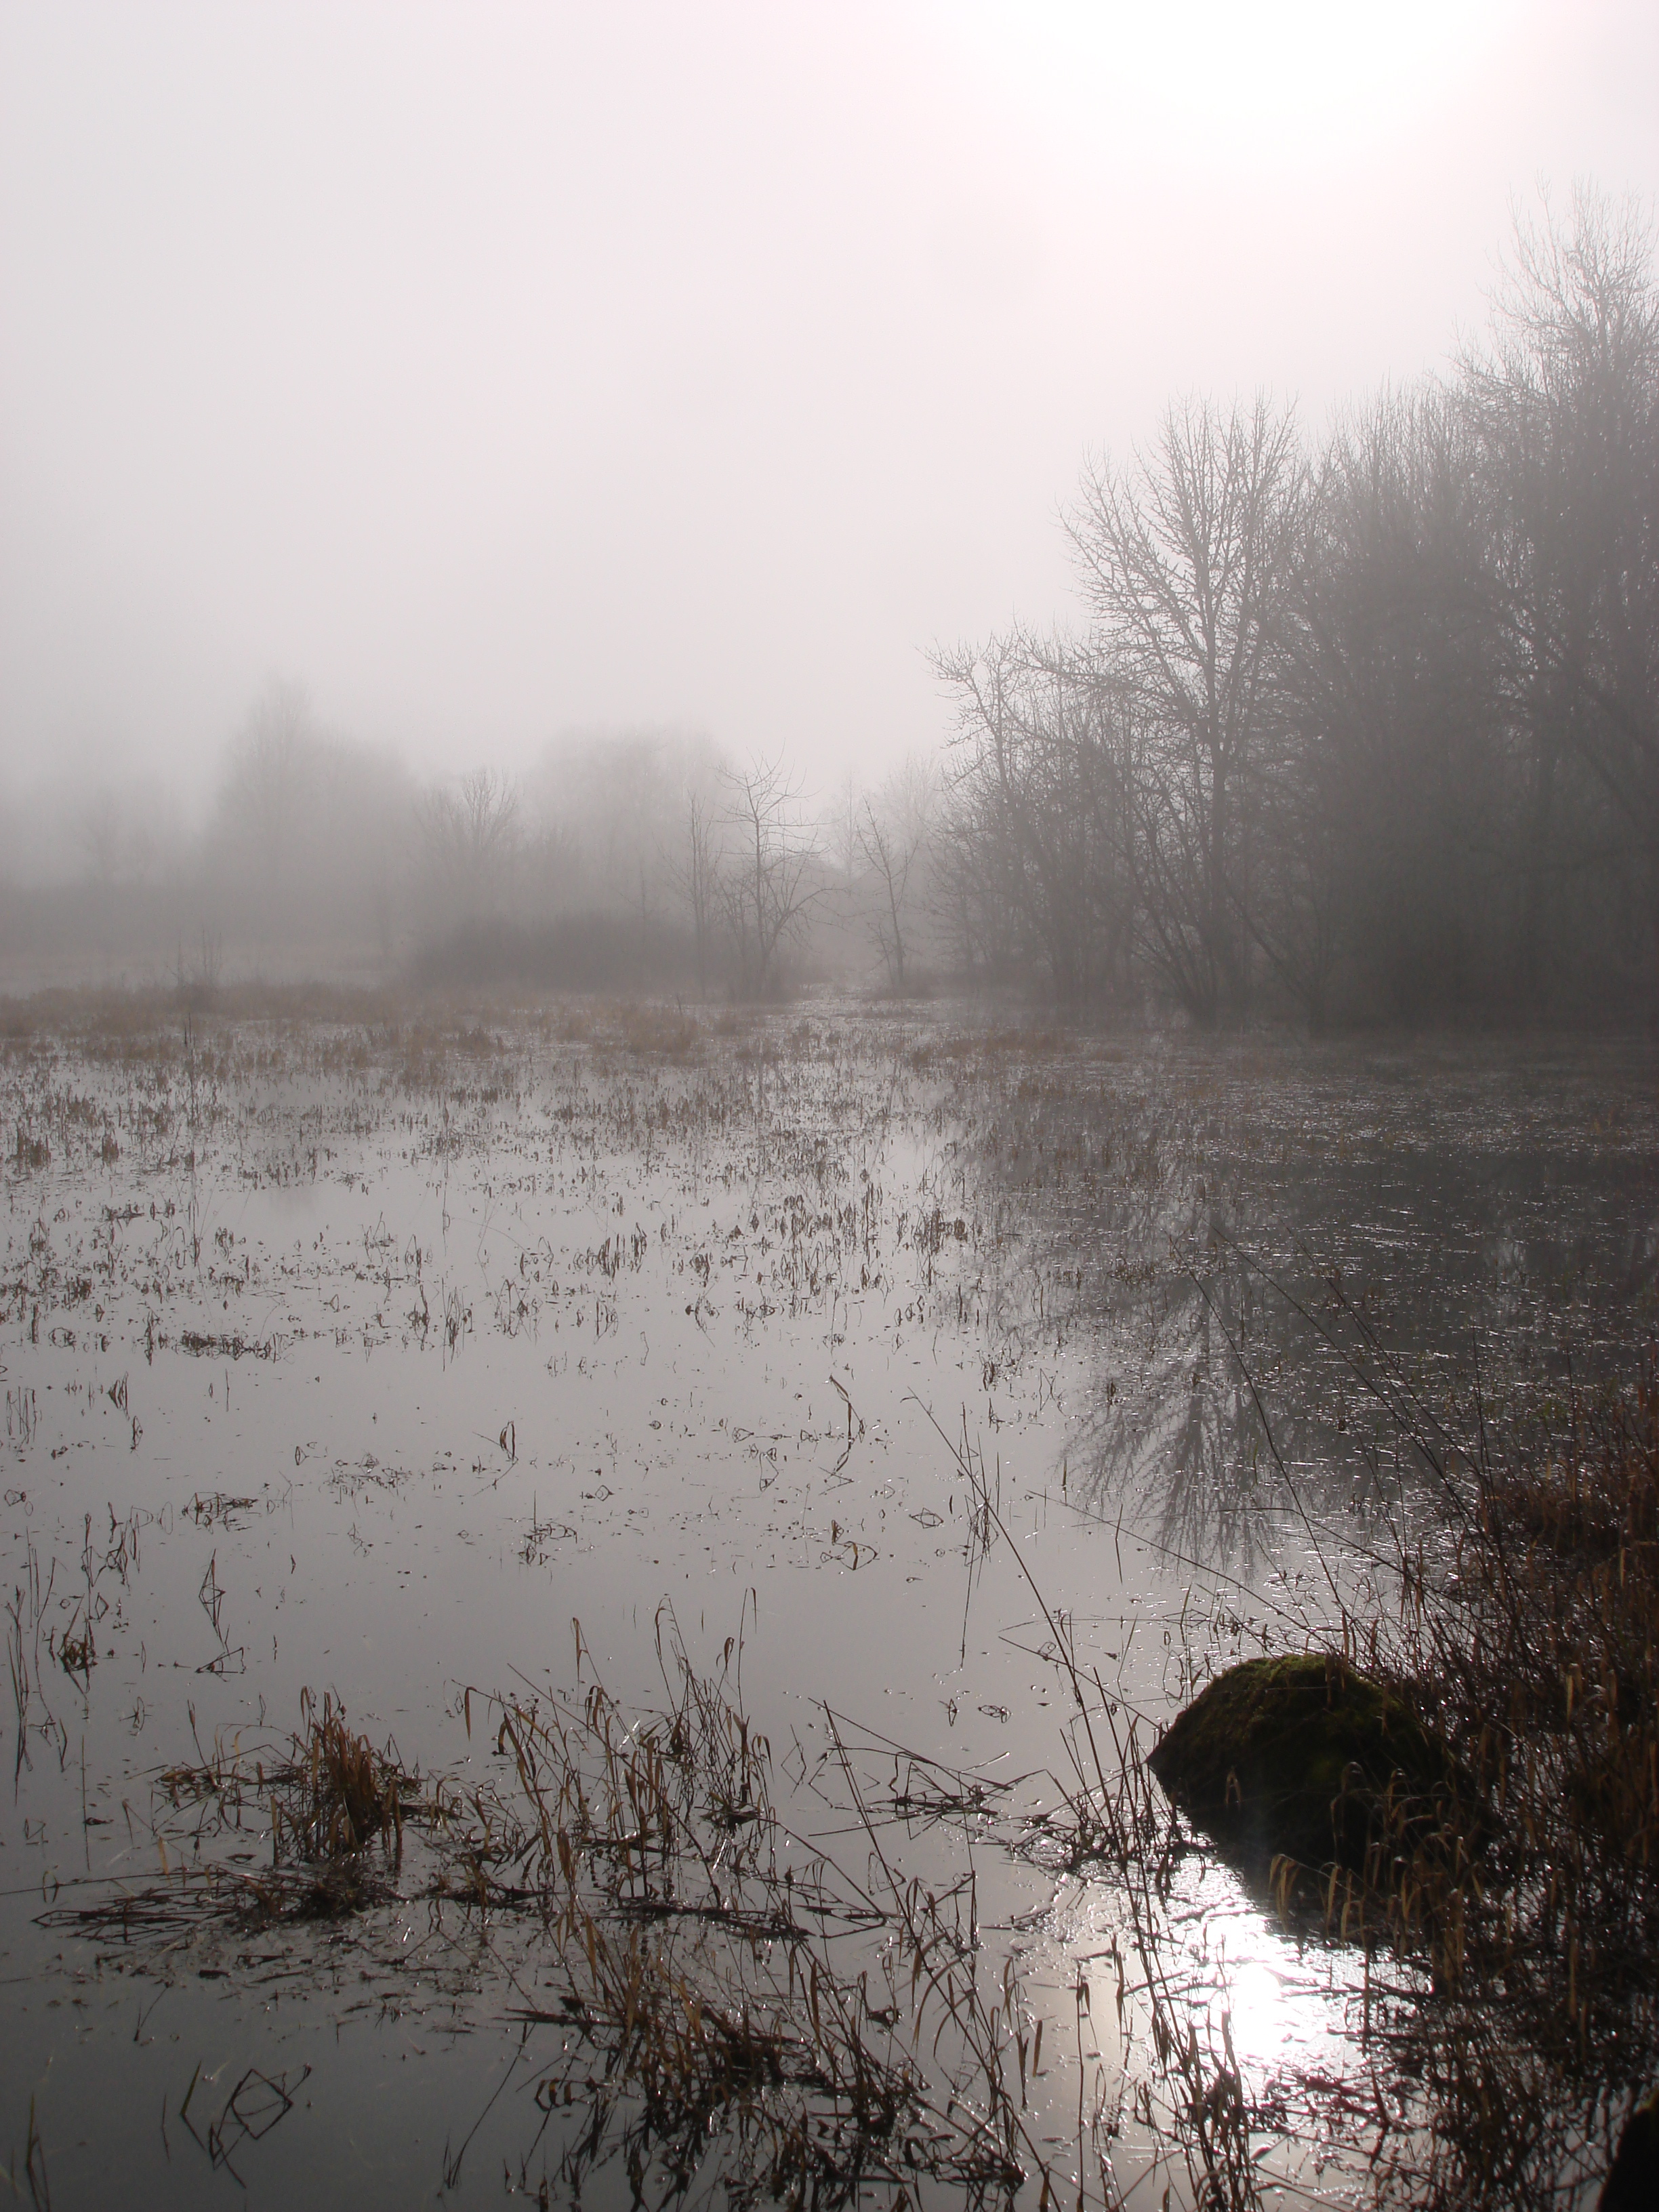 Frog Pond in the fog